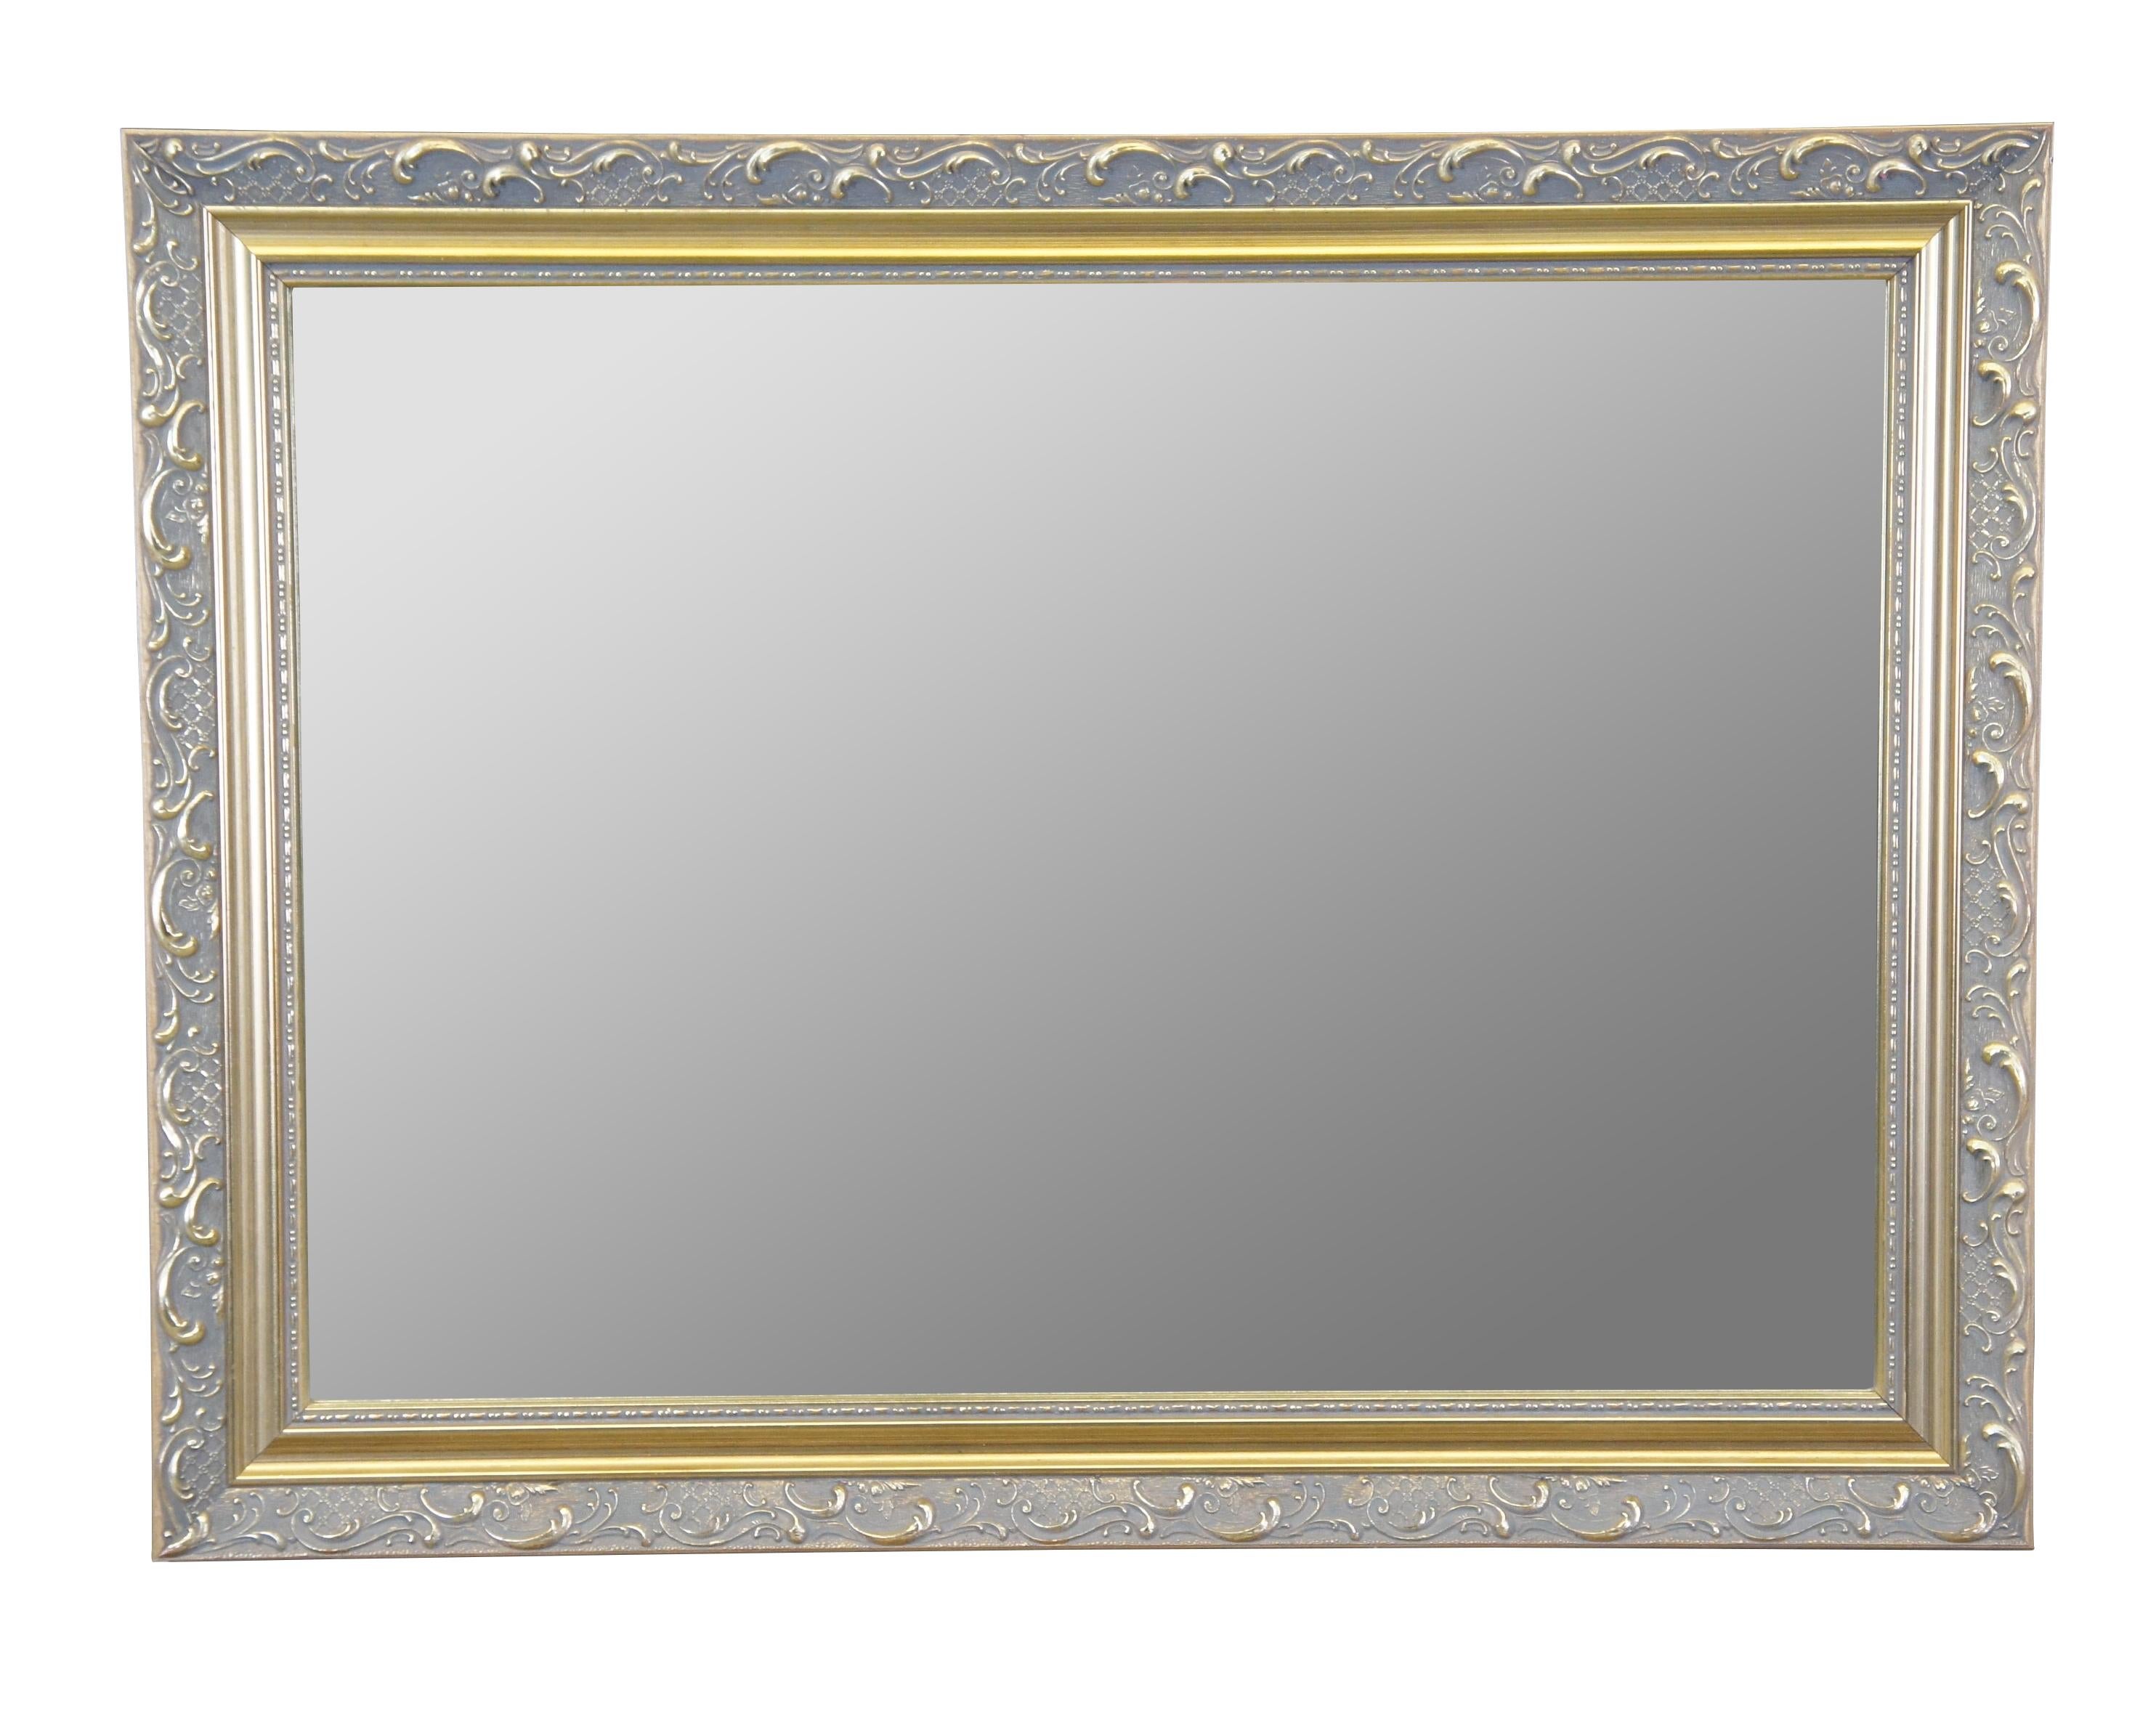 Carolina Mirror Company rectangular mirror with bevelled glass. Features a gold frame with 